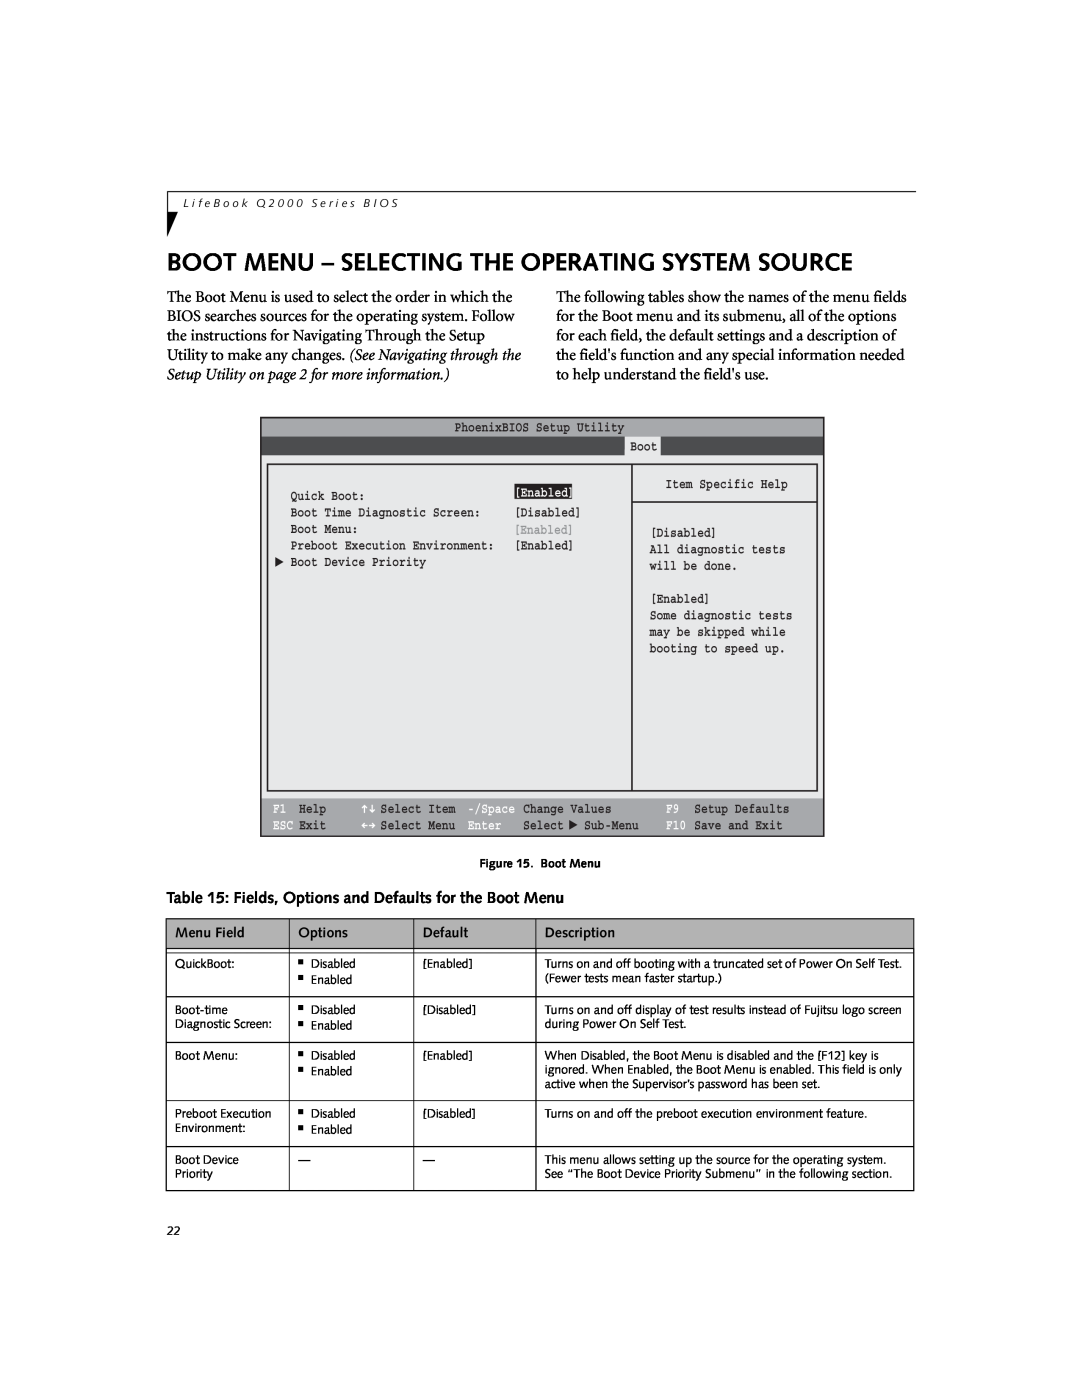 Fujitsu Q2010 Boot Menu - Selecting The Operating System Source, Fields, Options and Defaults for the Boot Menu, ESC Exit 